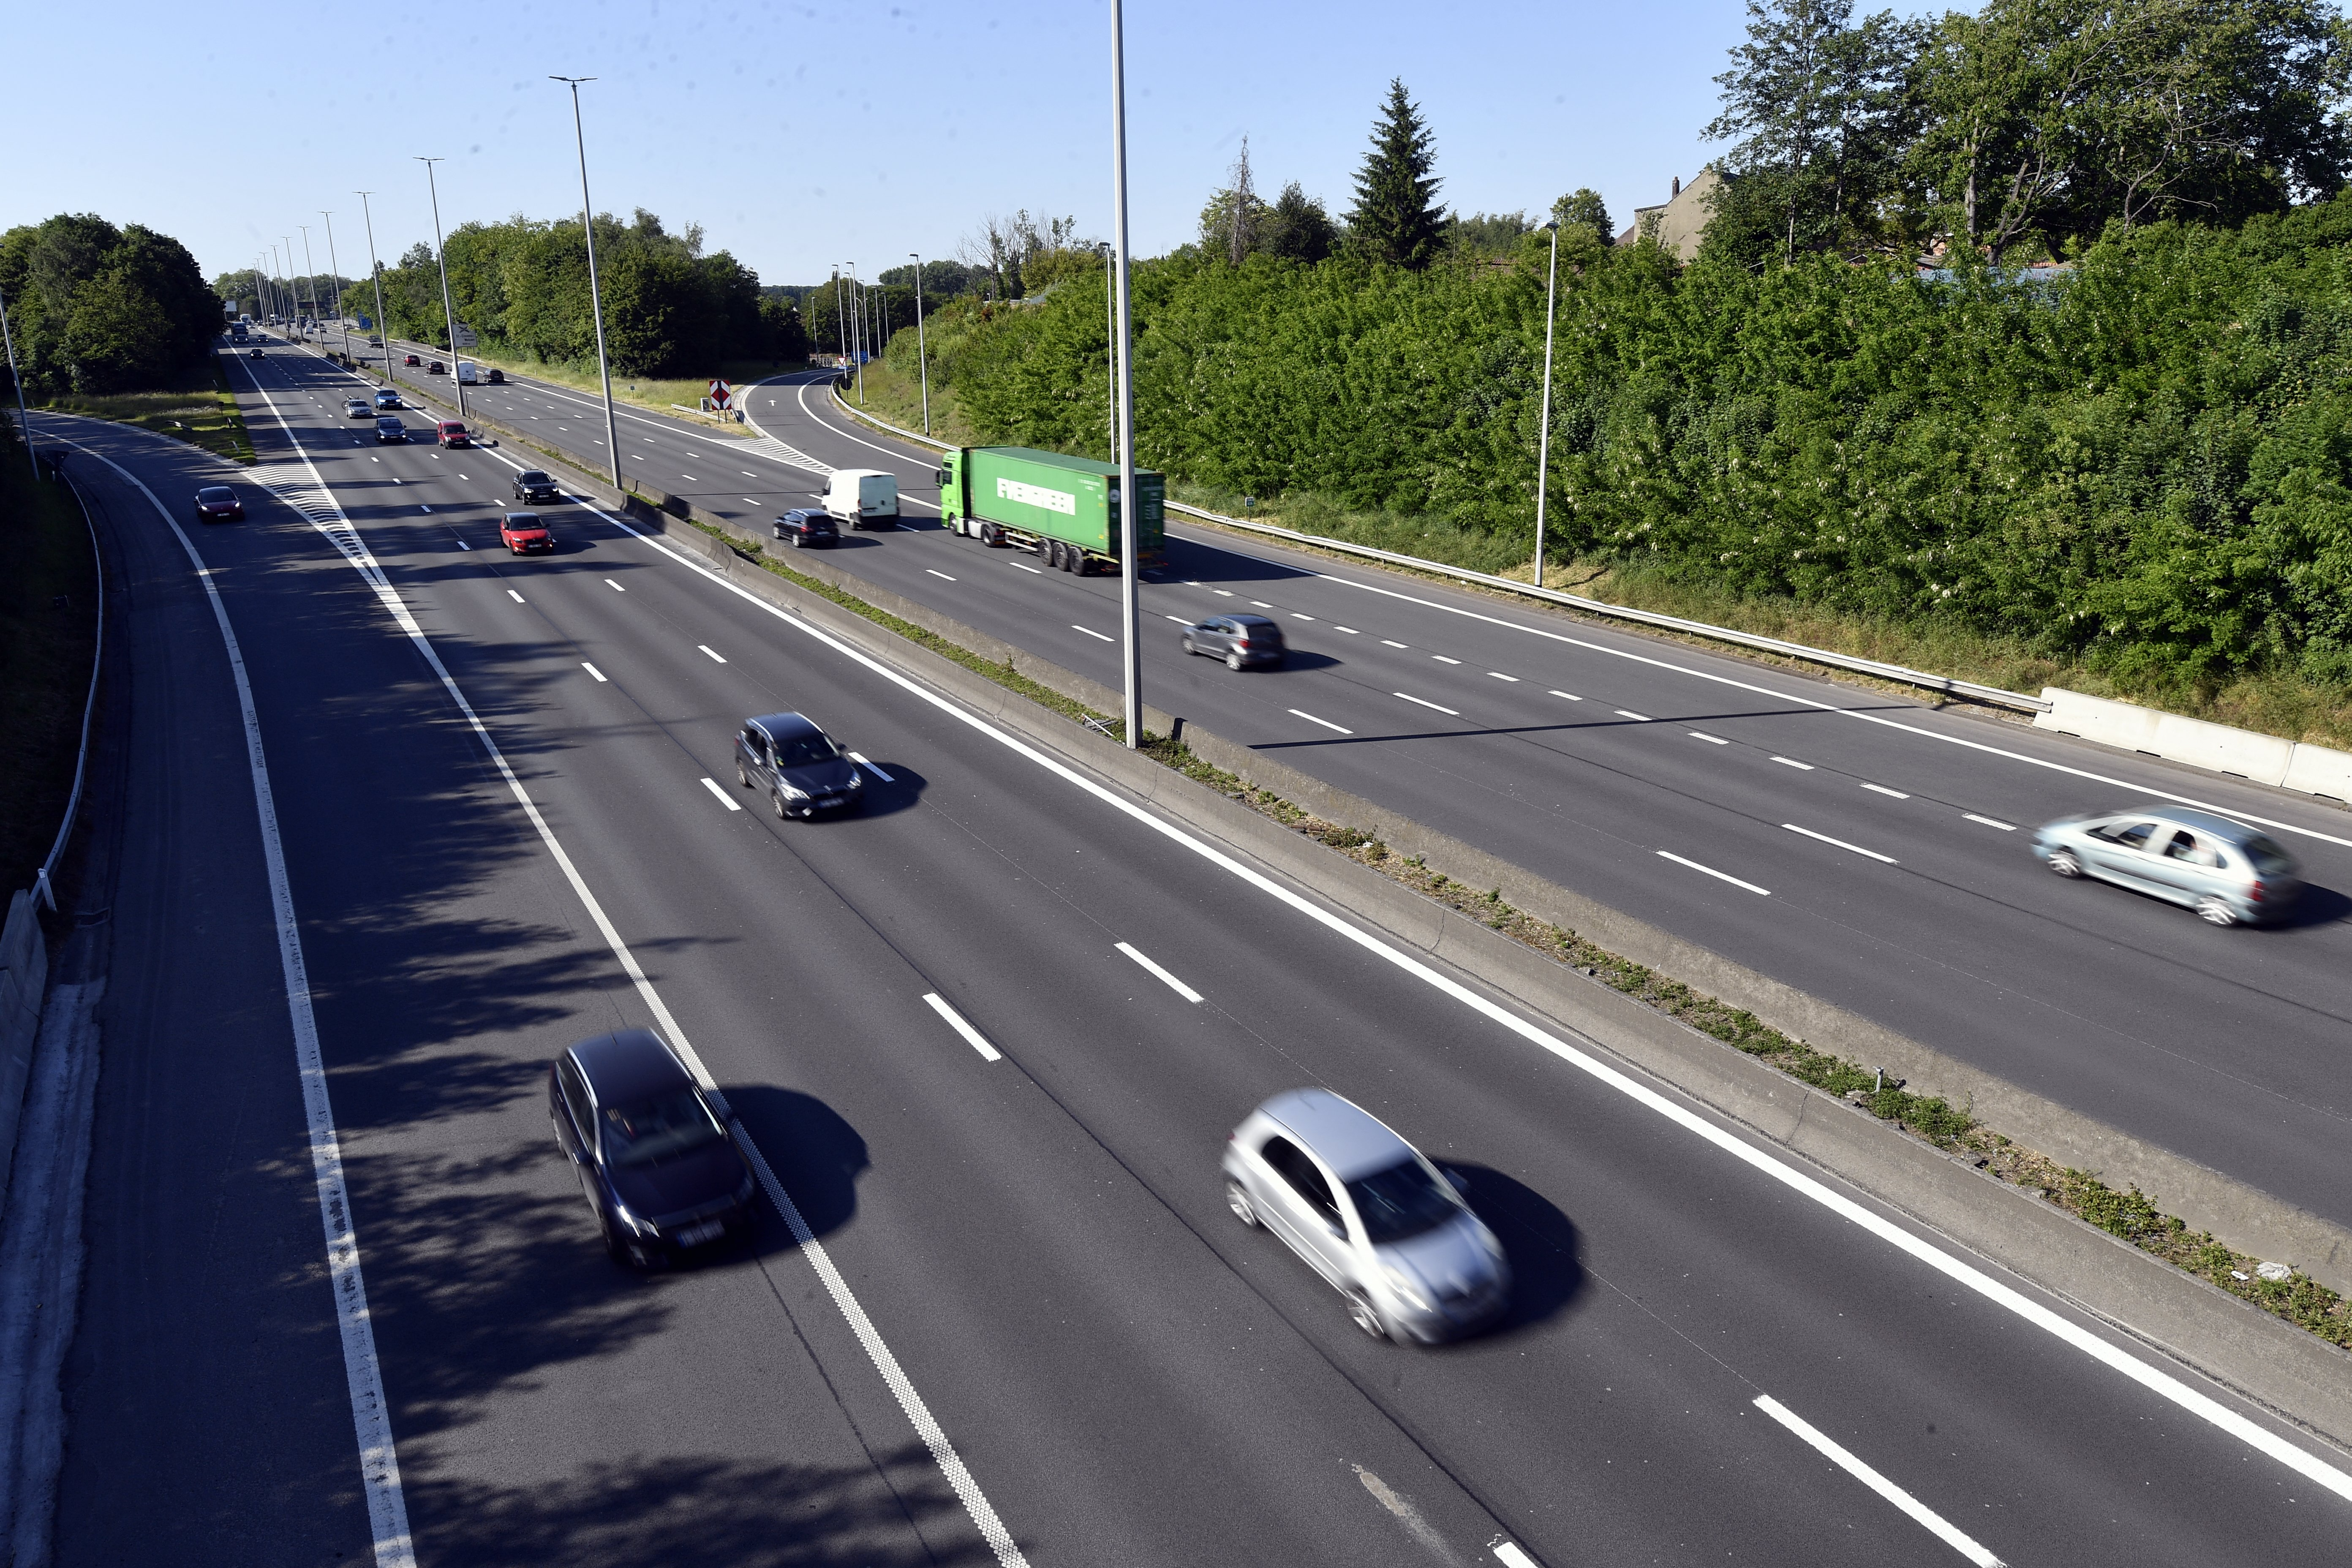 SD Worx: ‘seven out of ten Belgians prefer car for commuting’